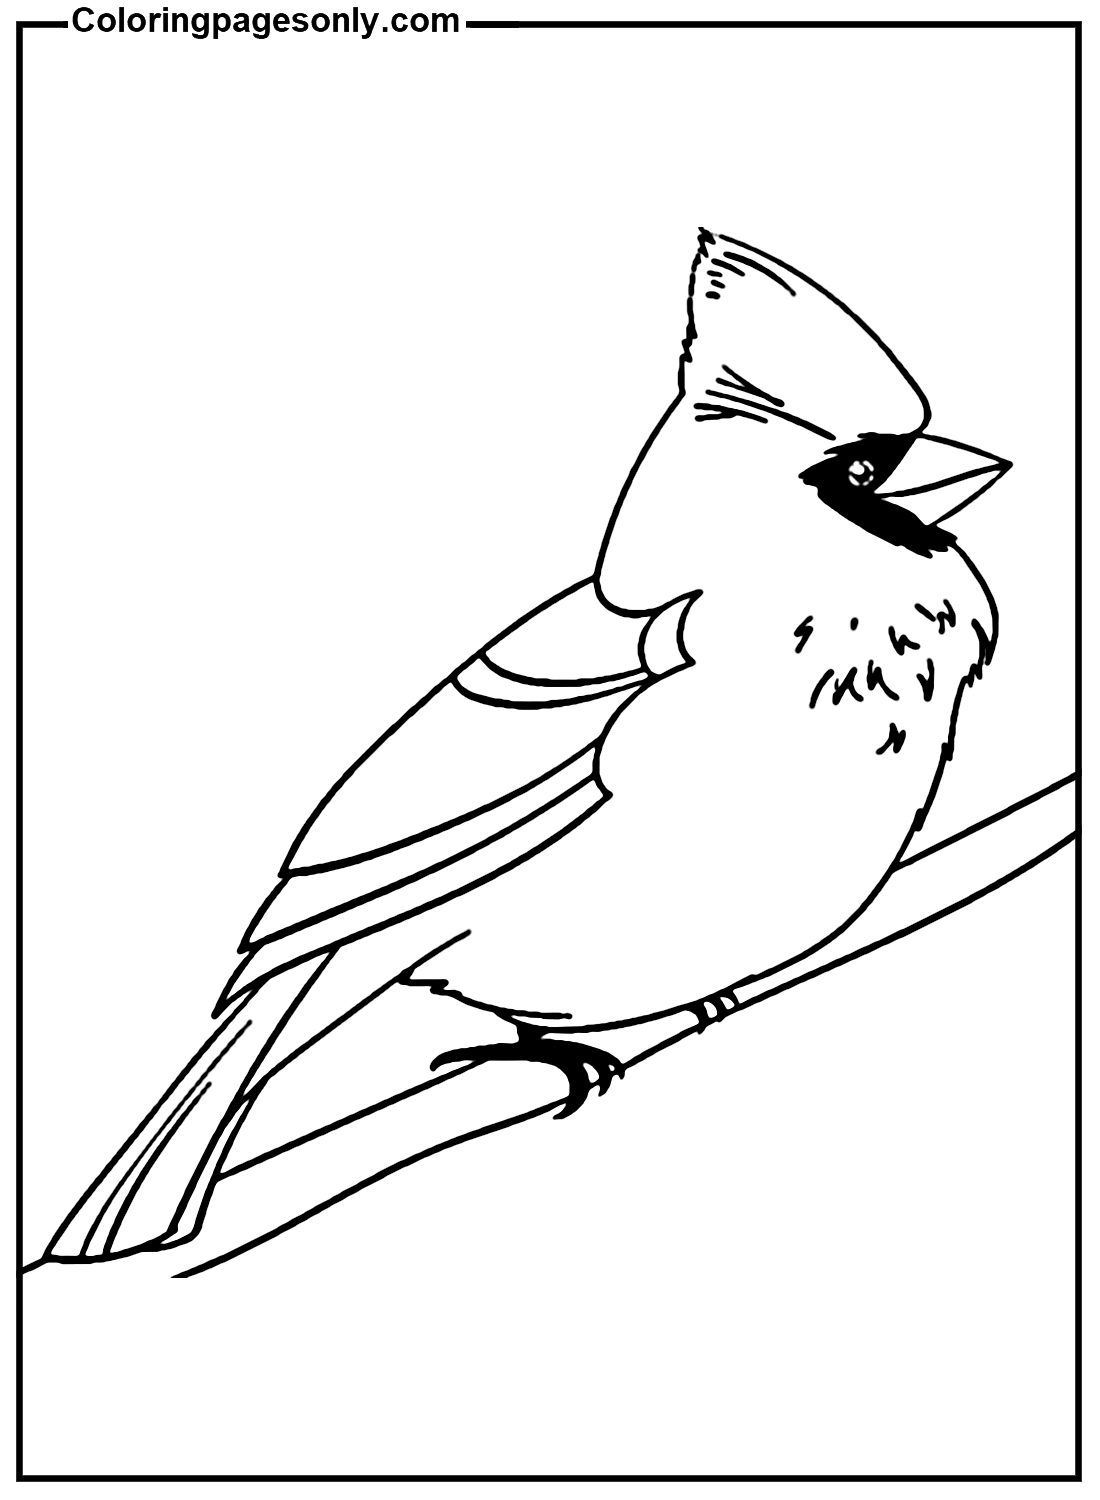 Cardinal Free Download Coloring Page